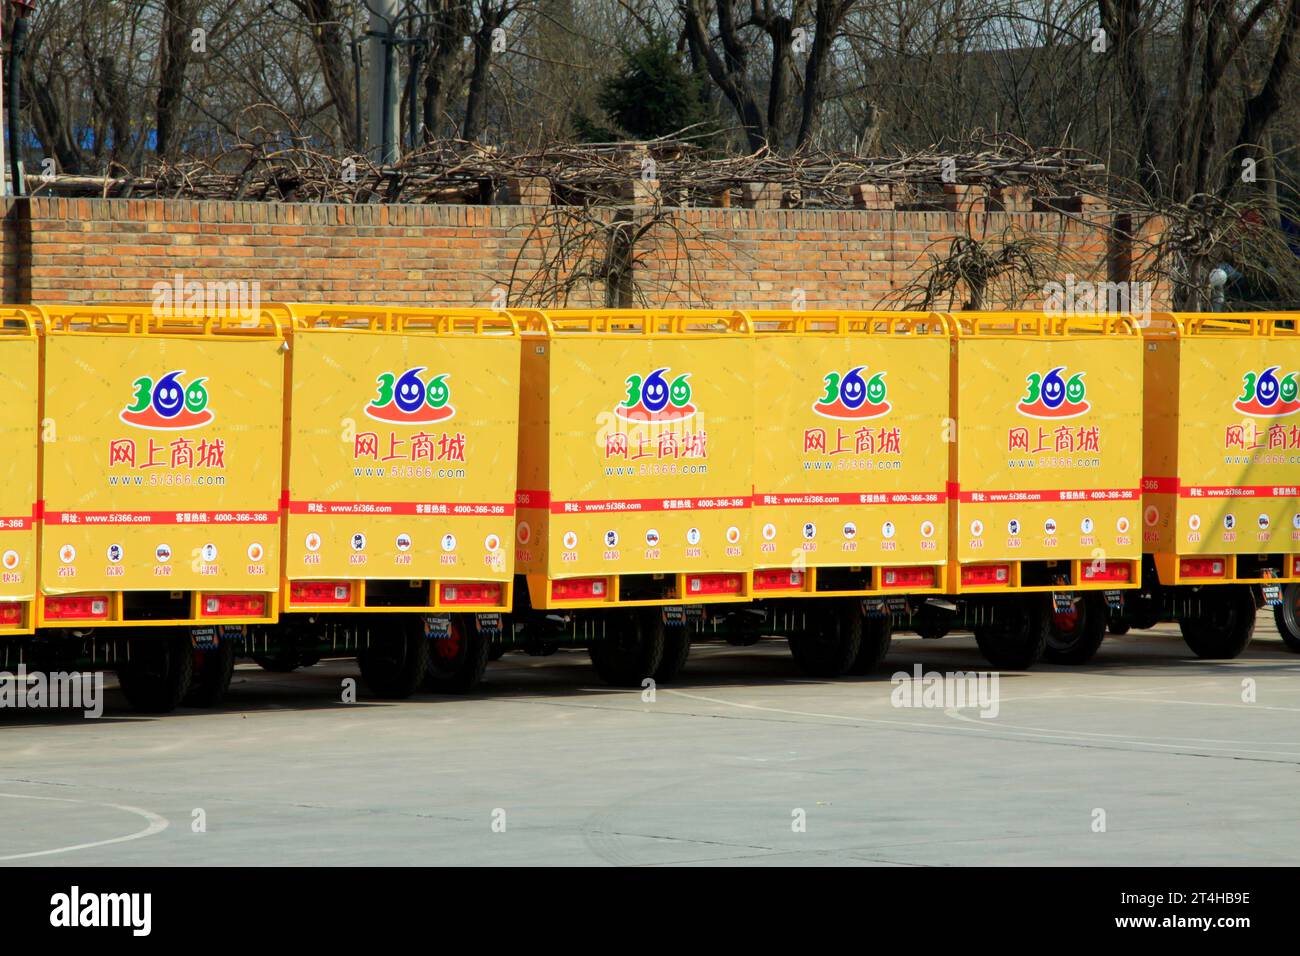 LANGFANG CITY - MARCH 12: 366 online shop delivery ehicle cart, March 12, 2015, Langfang City, Hebei Province, China. Stock Photo